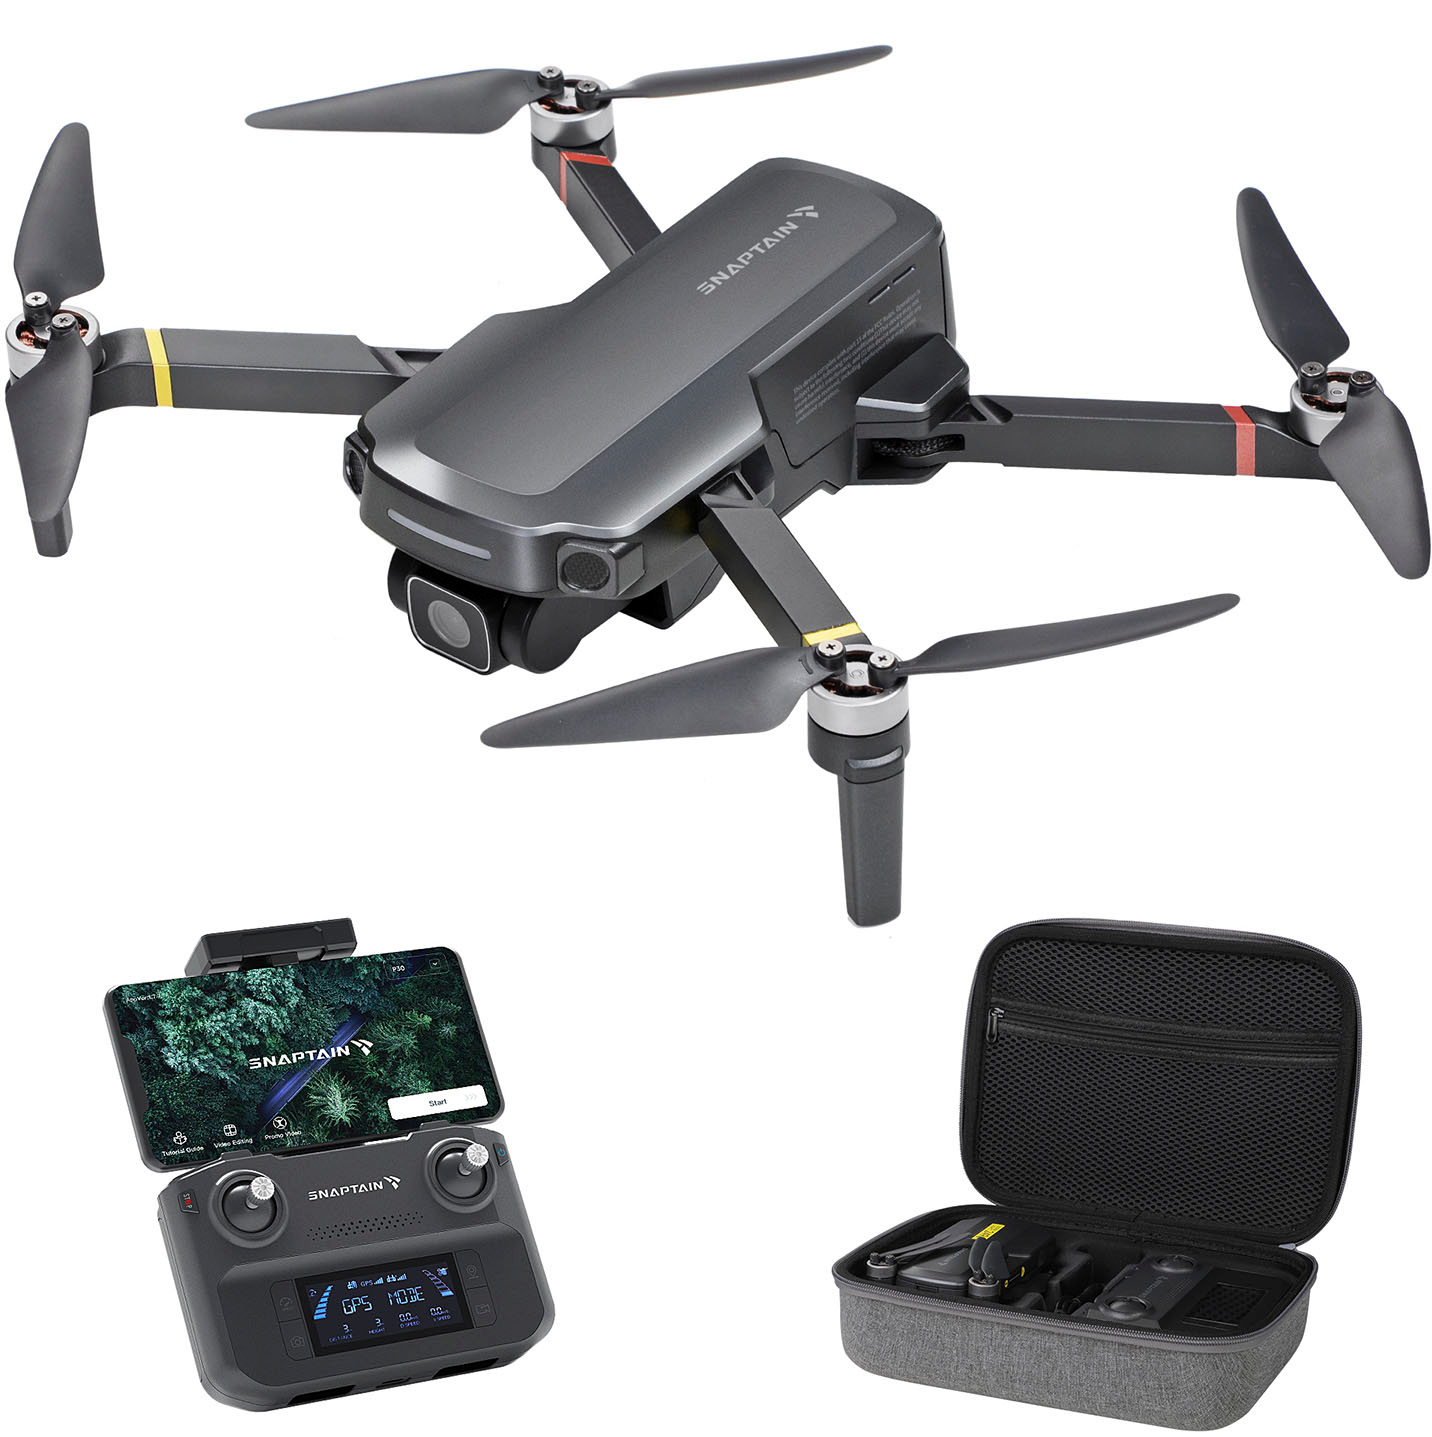 Vantop Snaptain P30 GPS Drone with Remote Controller P30 Best Buy